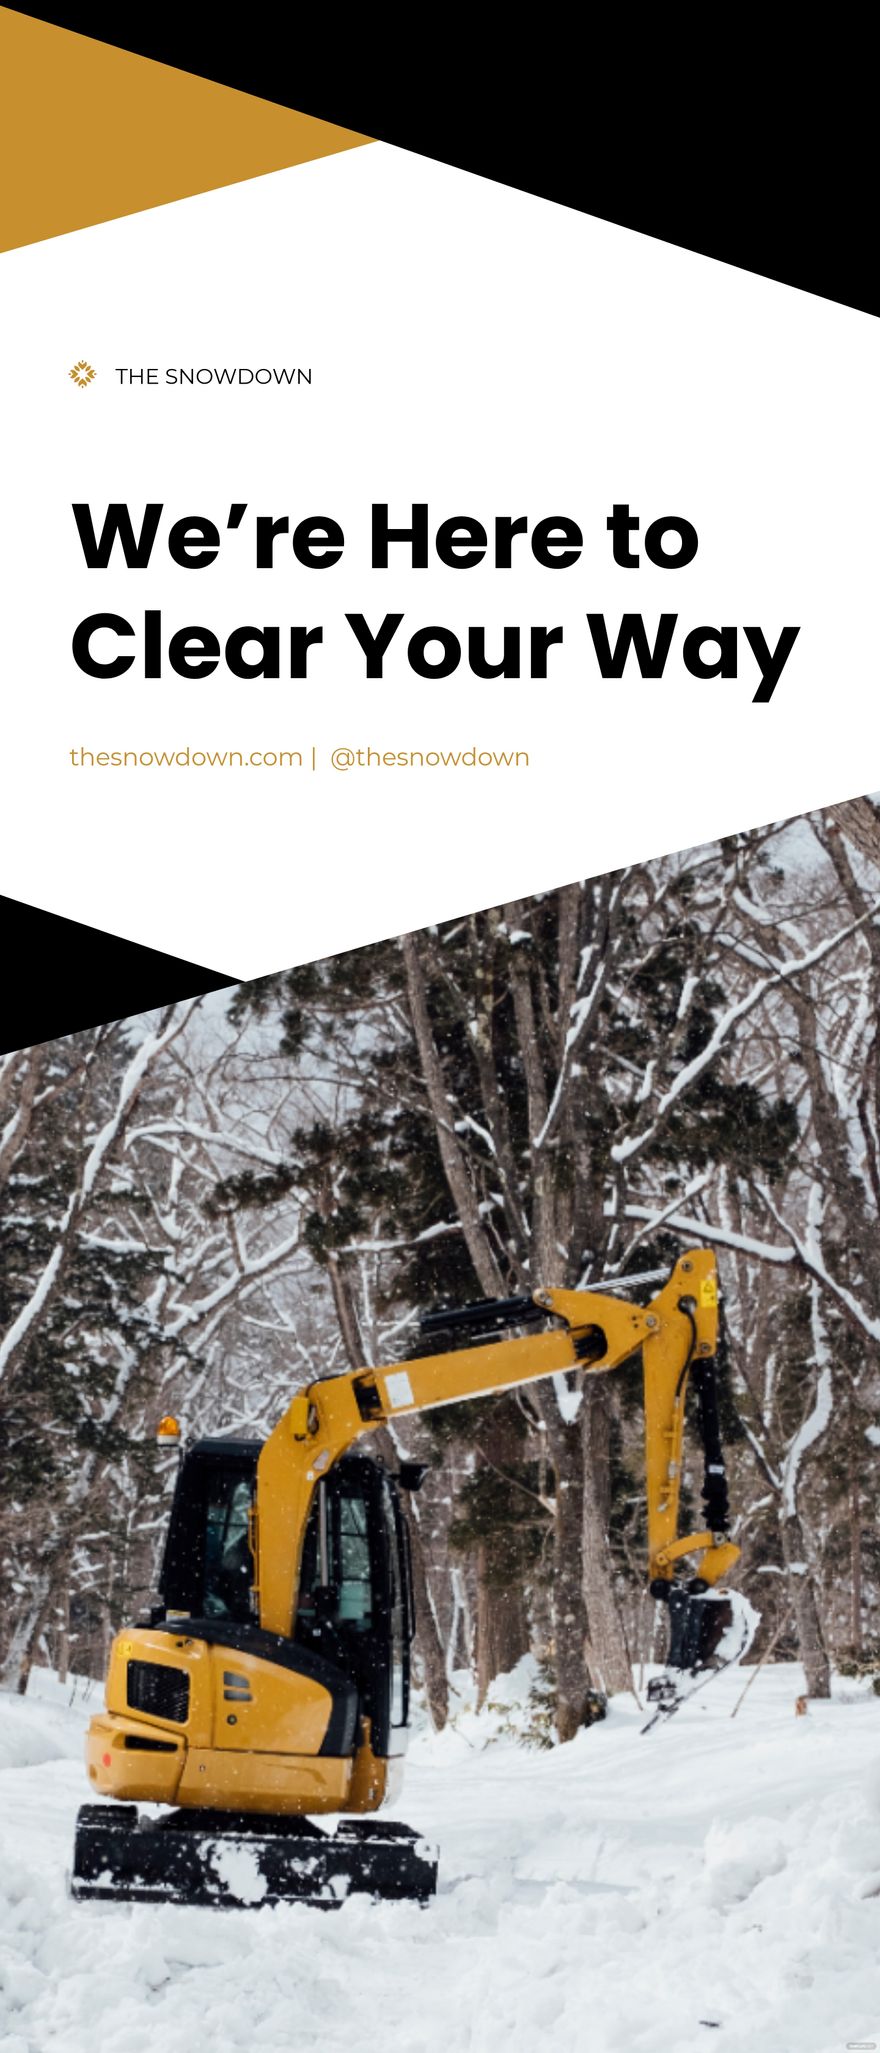 Snow Removal Service Roll Up Banner Template